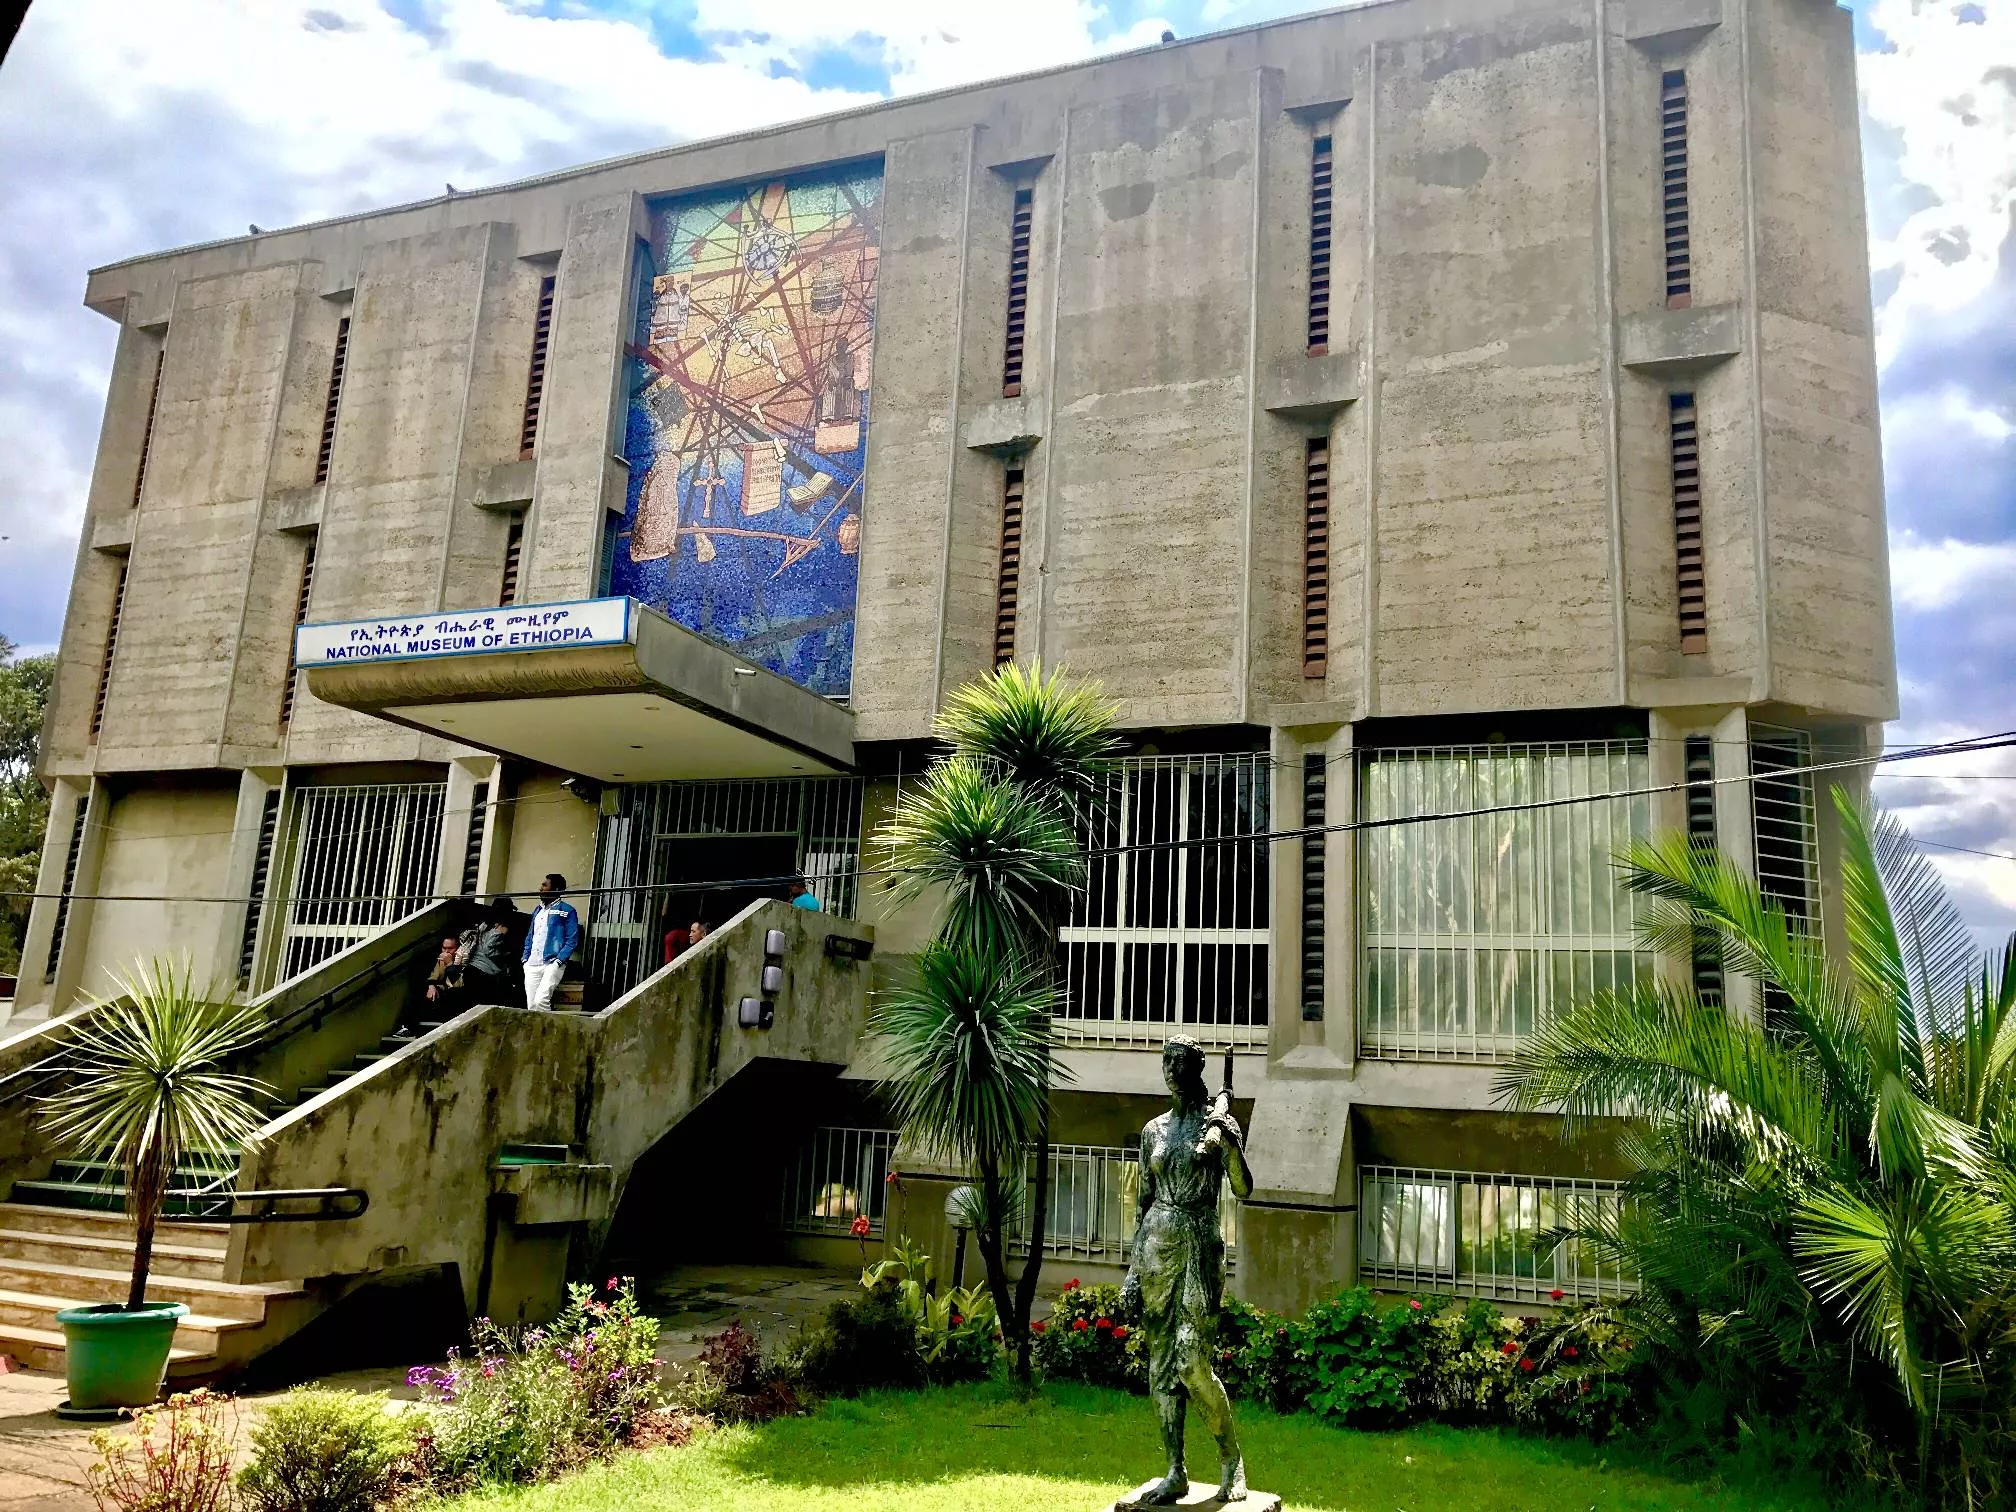 National Museum of Ethiopia in Ethiopia, Africa | Museums - Rated 3.3